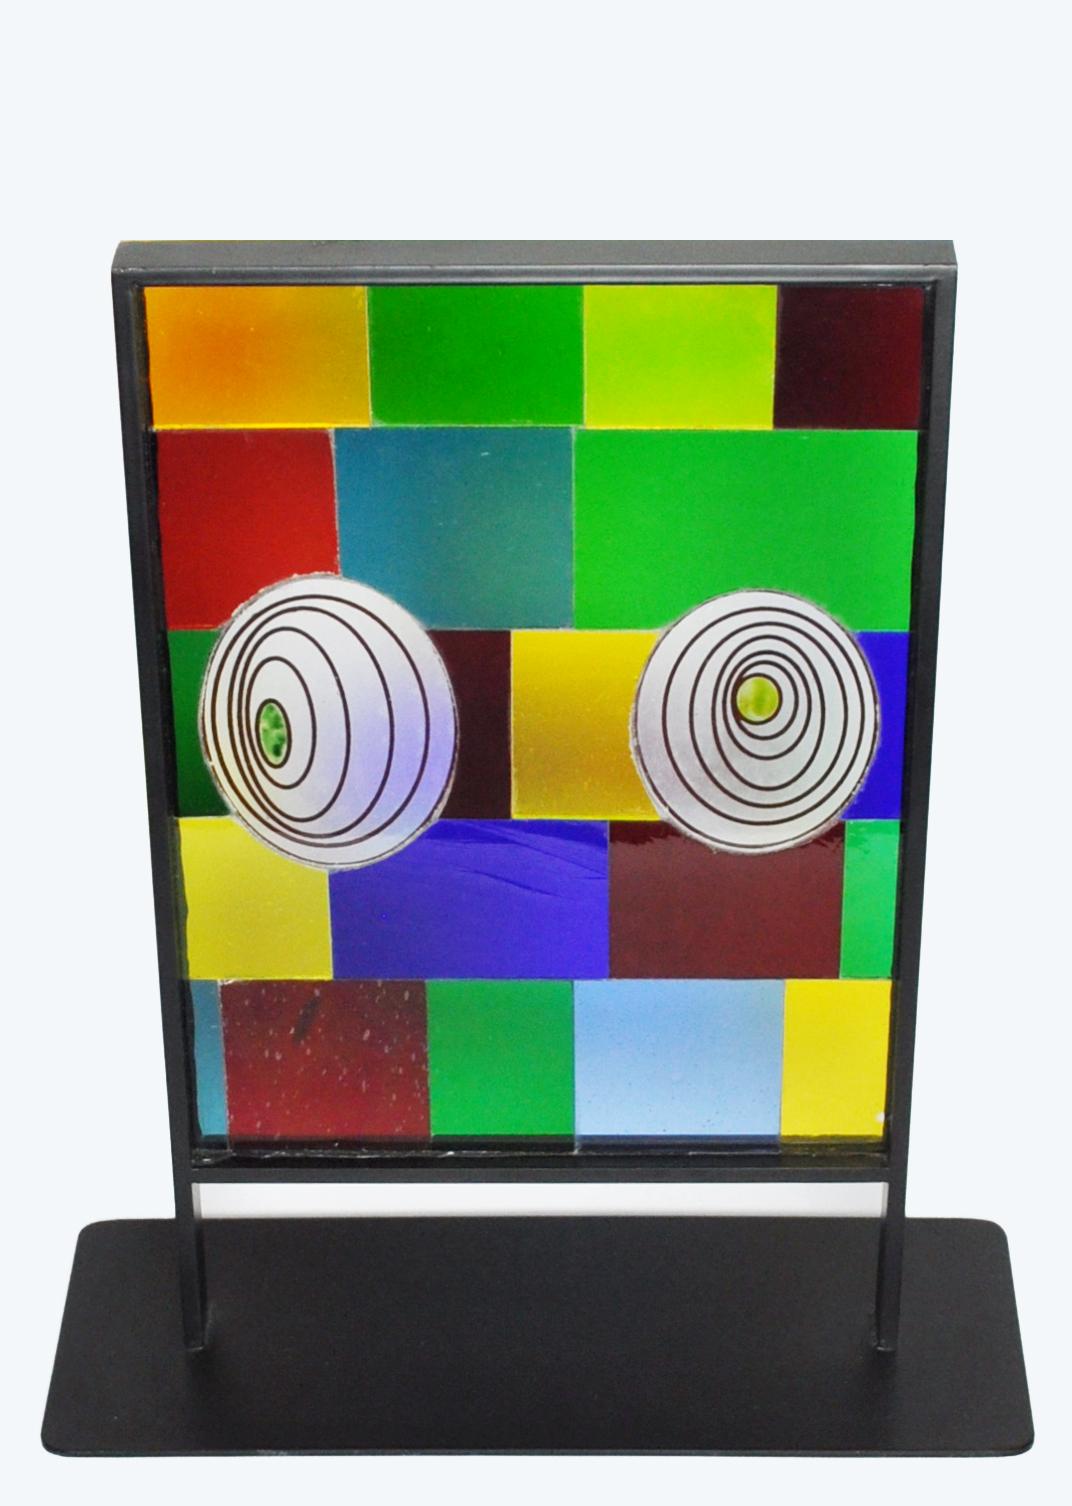 Peter Stuhr Abstract Sculpture – Contemporary Abstract Geometric Sculpture "Chameleon"